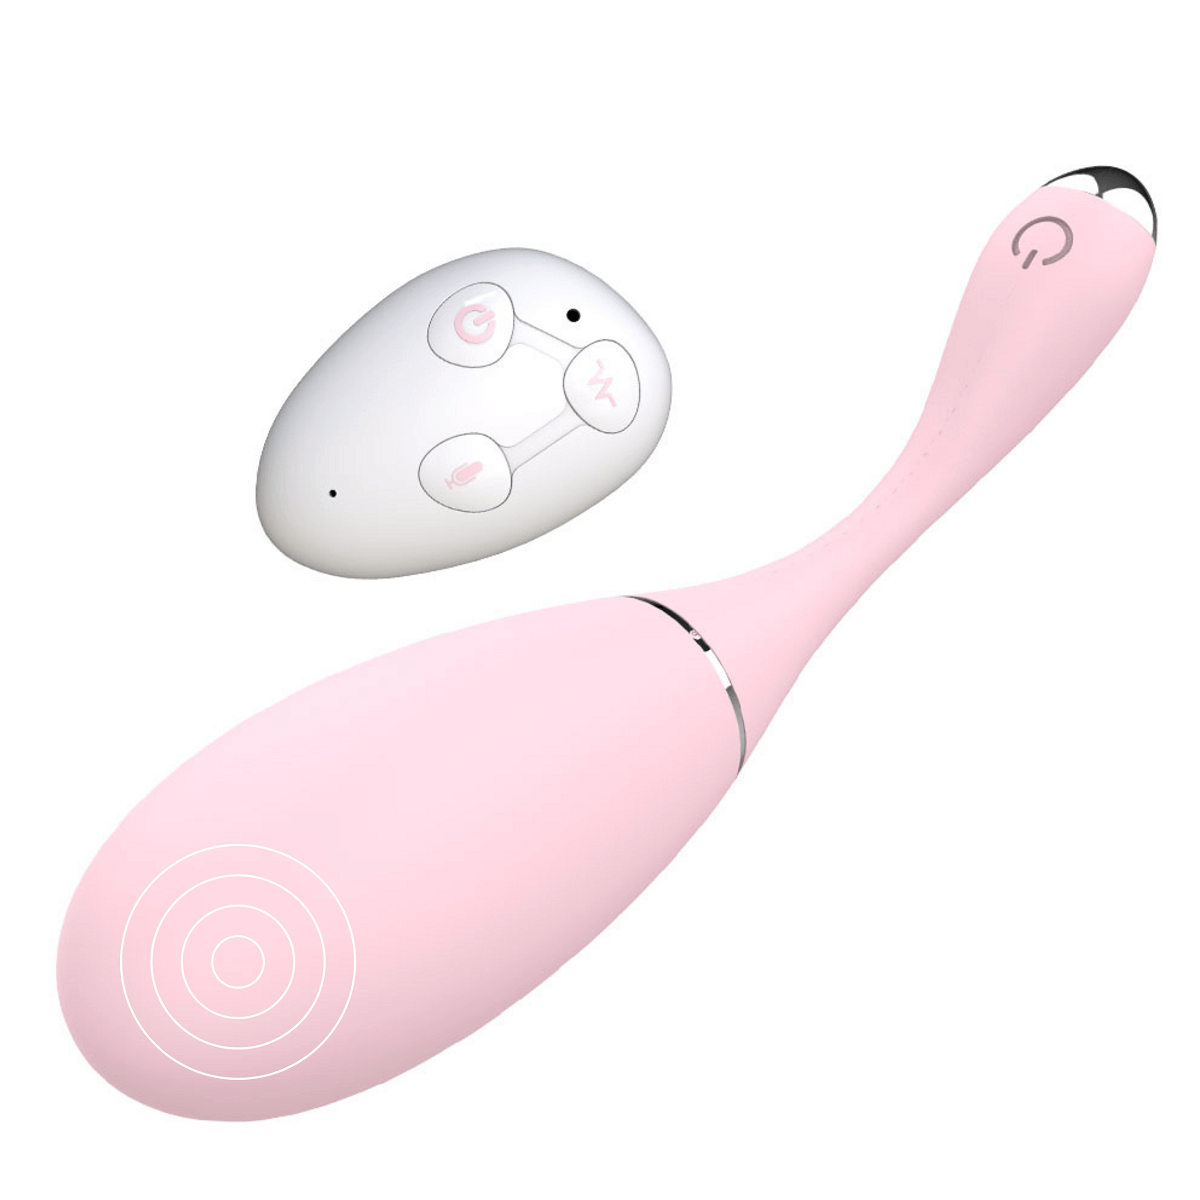 Remote & Voice Activated Egg Vibrator Sex Toy